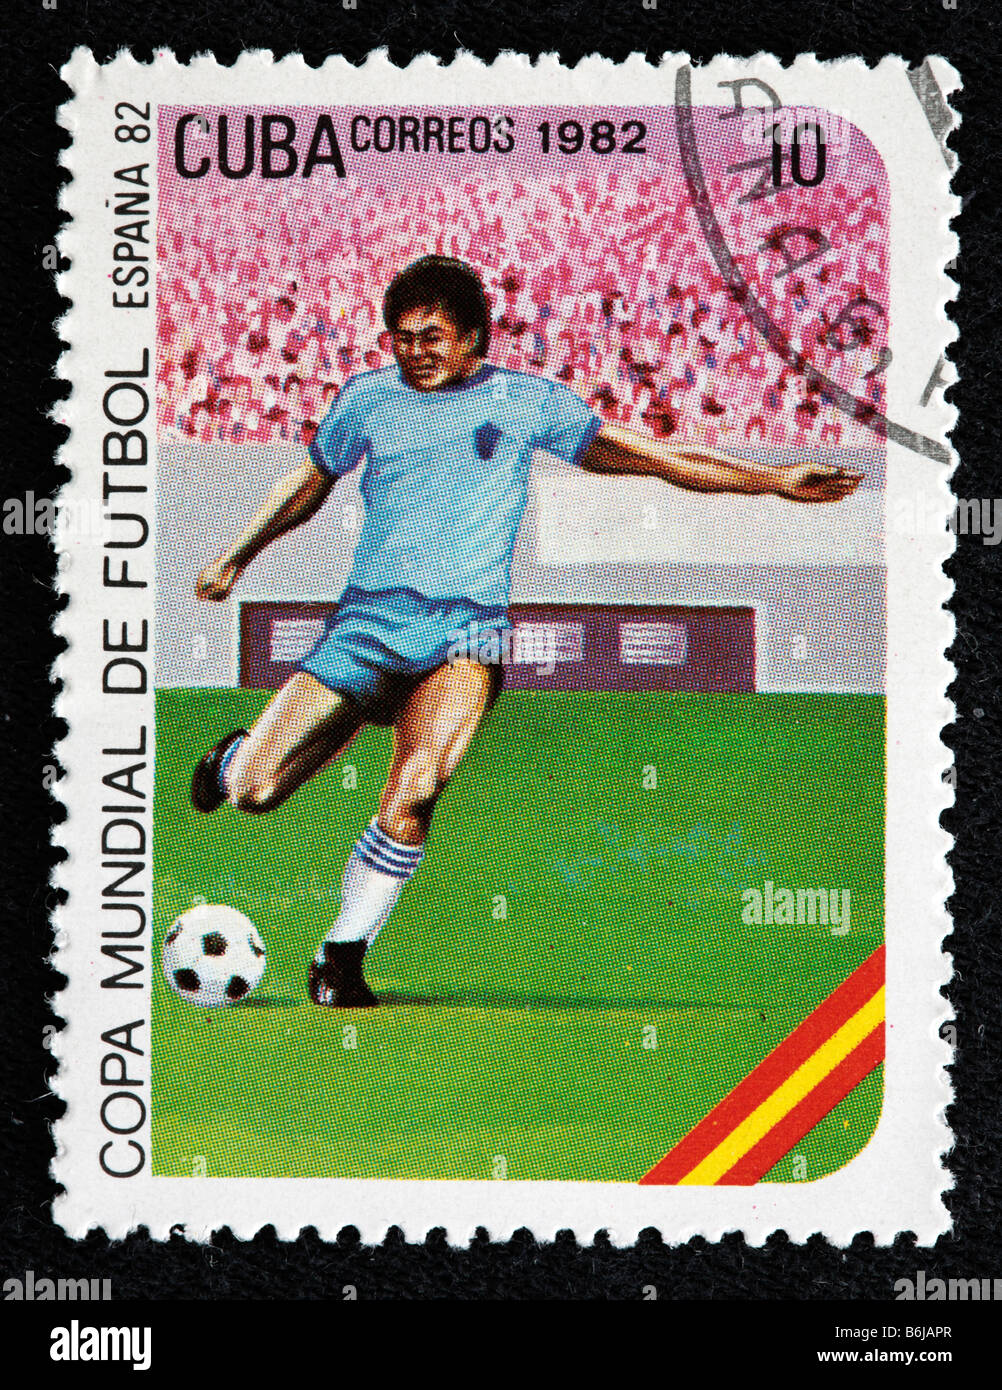 Mexico 1825-1827 complete.issue. Soccer Stamps for collectors Spain 1982 Football-WM ´82